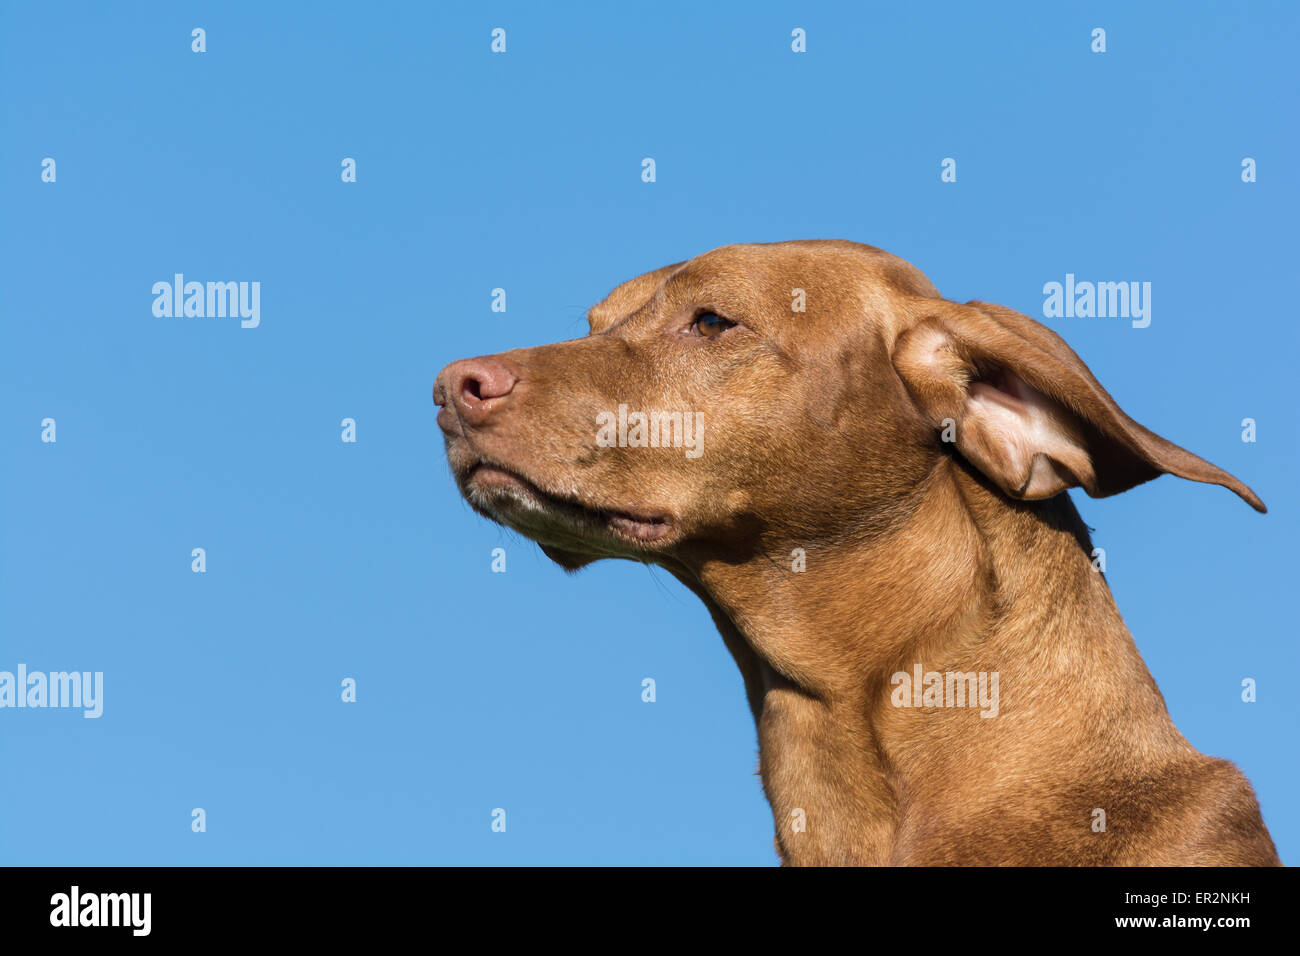 The head and neck of a Vizsla dog (Hungarian Pointer) in front of a blue sky. Stock Photo